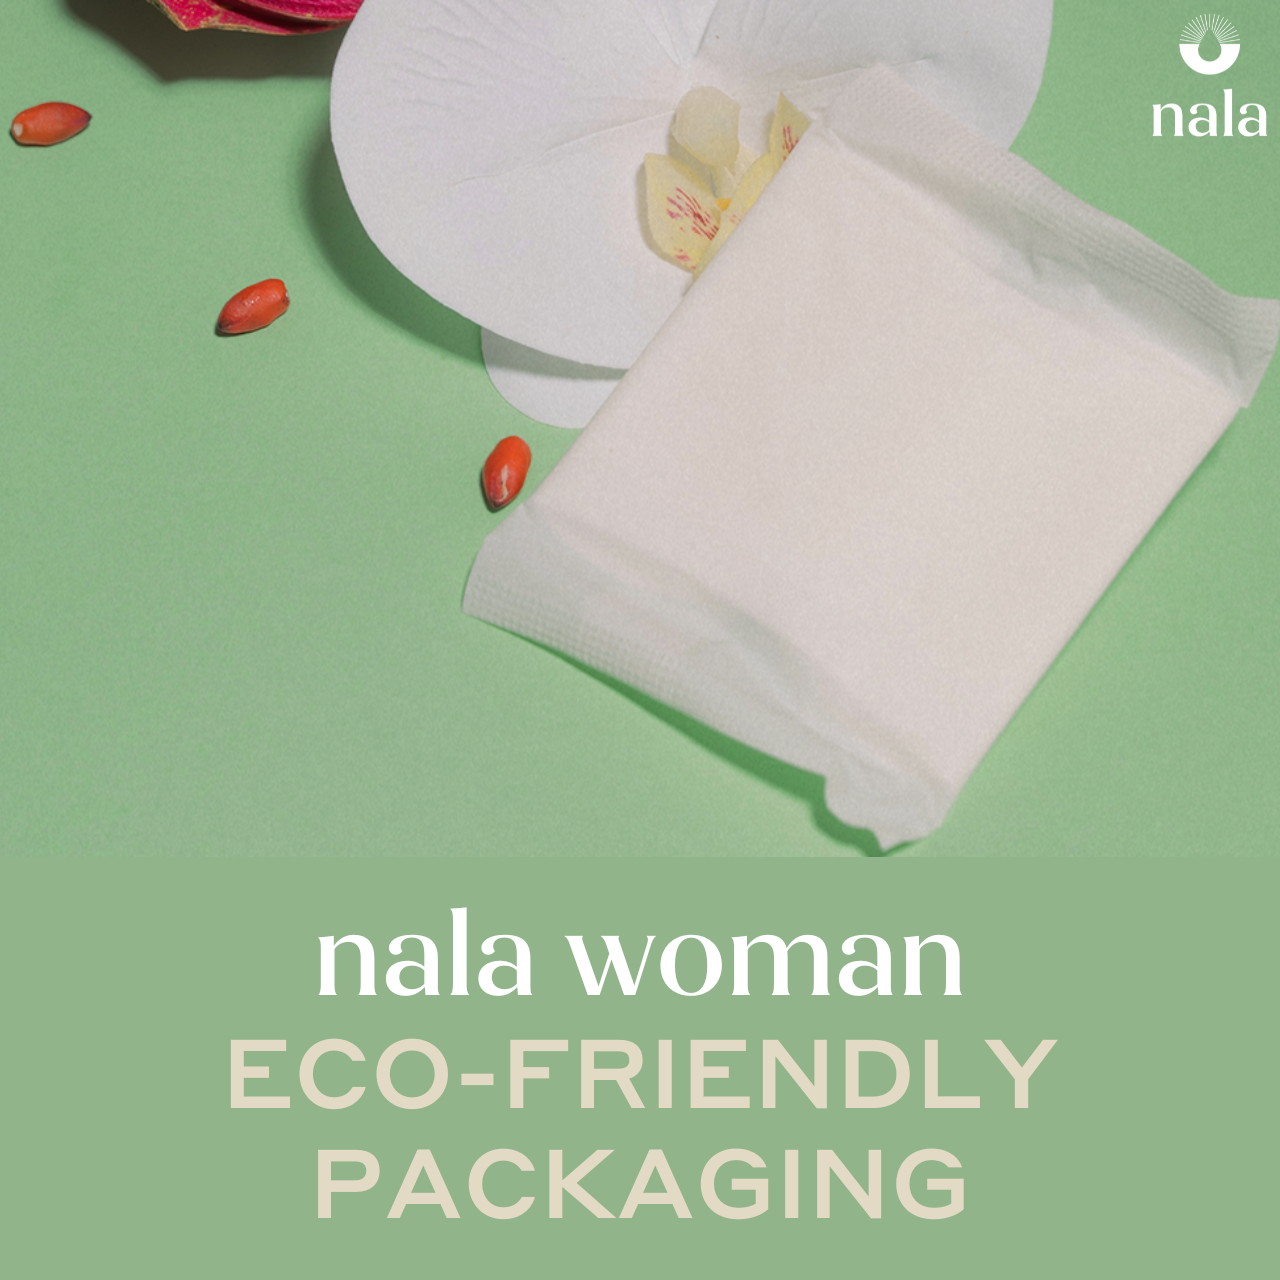 Nala's Eco-Friendly Packaging: Good for the environment 🌿